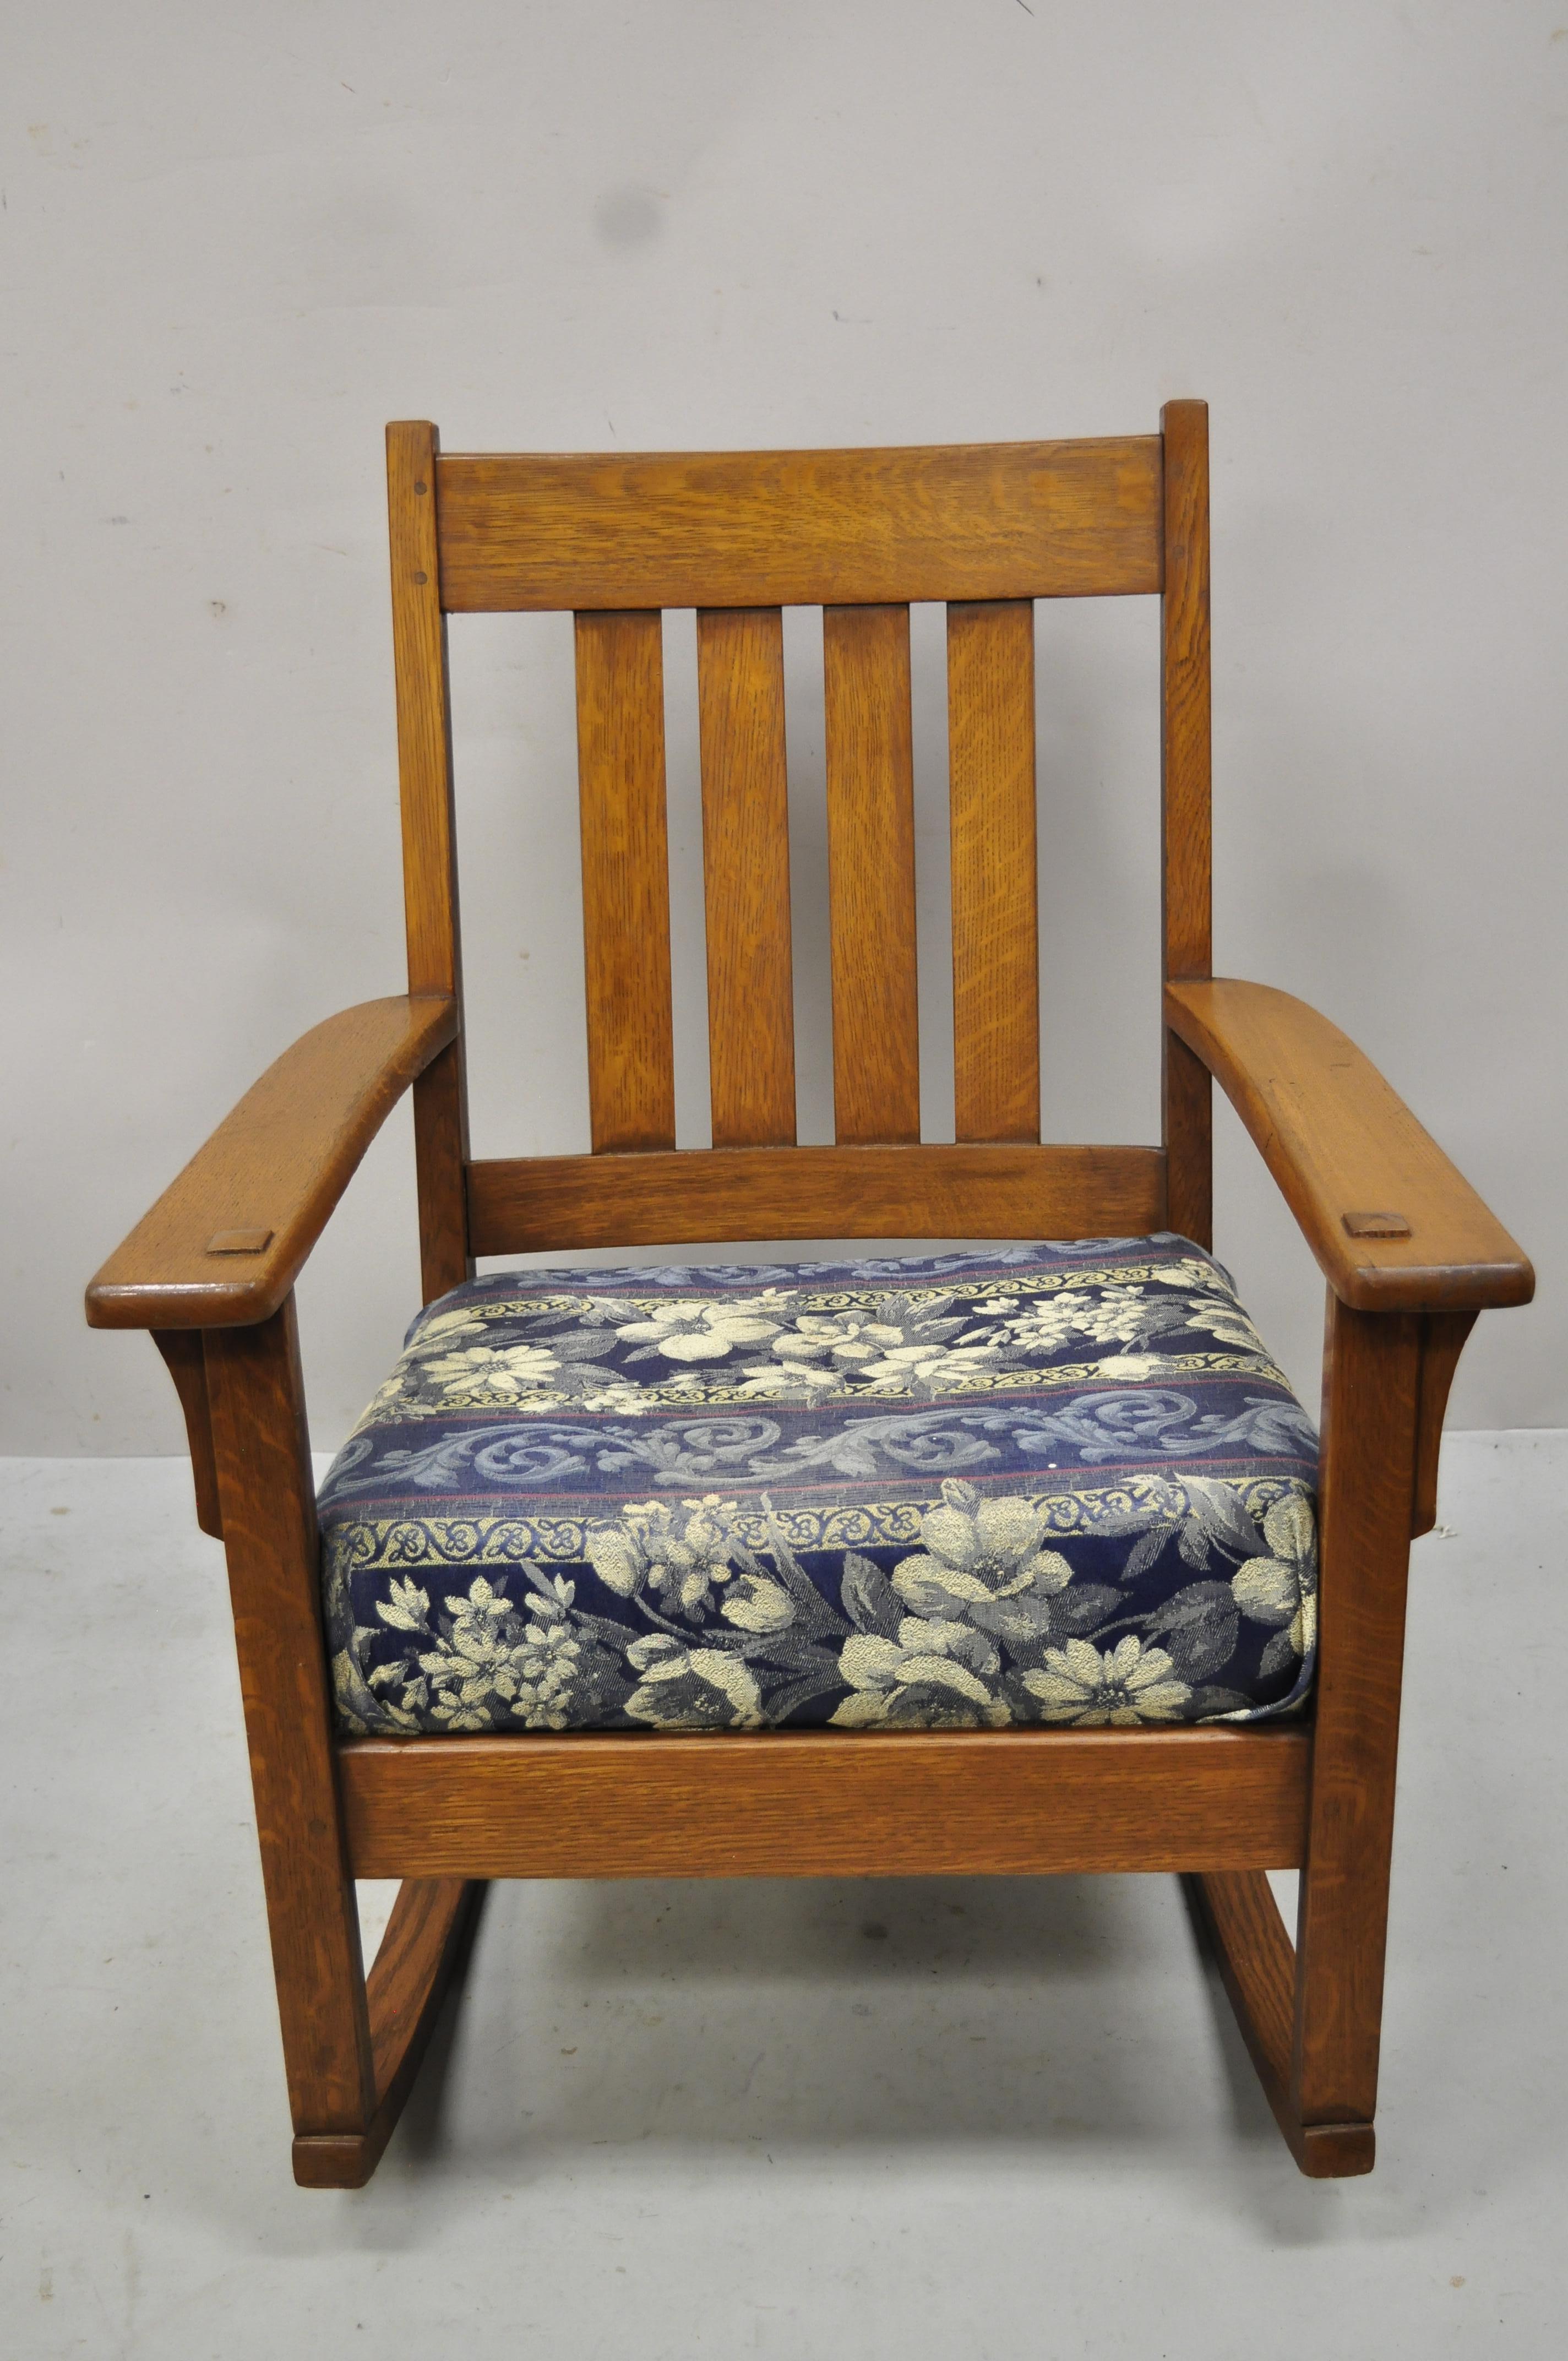 J.M. Young & Sons Antique Mission Oak Arts & Crafts Rocker rocking chair. Item features solid wood construction, beautiful wood grain, original label, very nice antique item, quality American craftsmanship. Circa Early 1900s. Measurements: 35